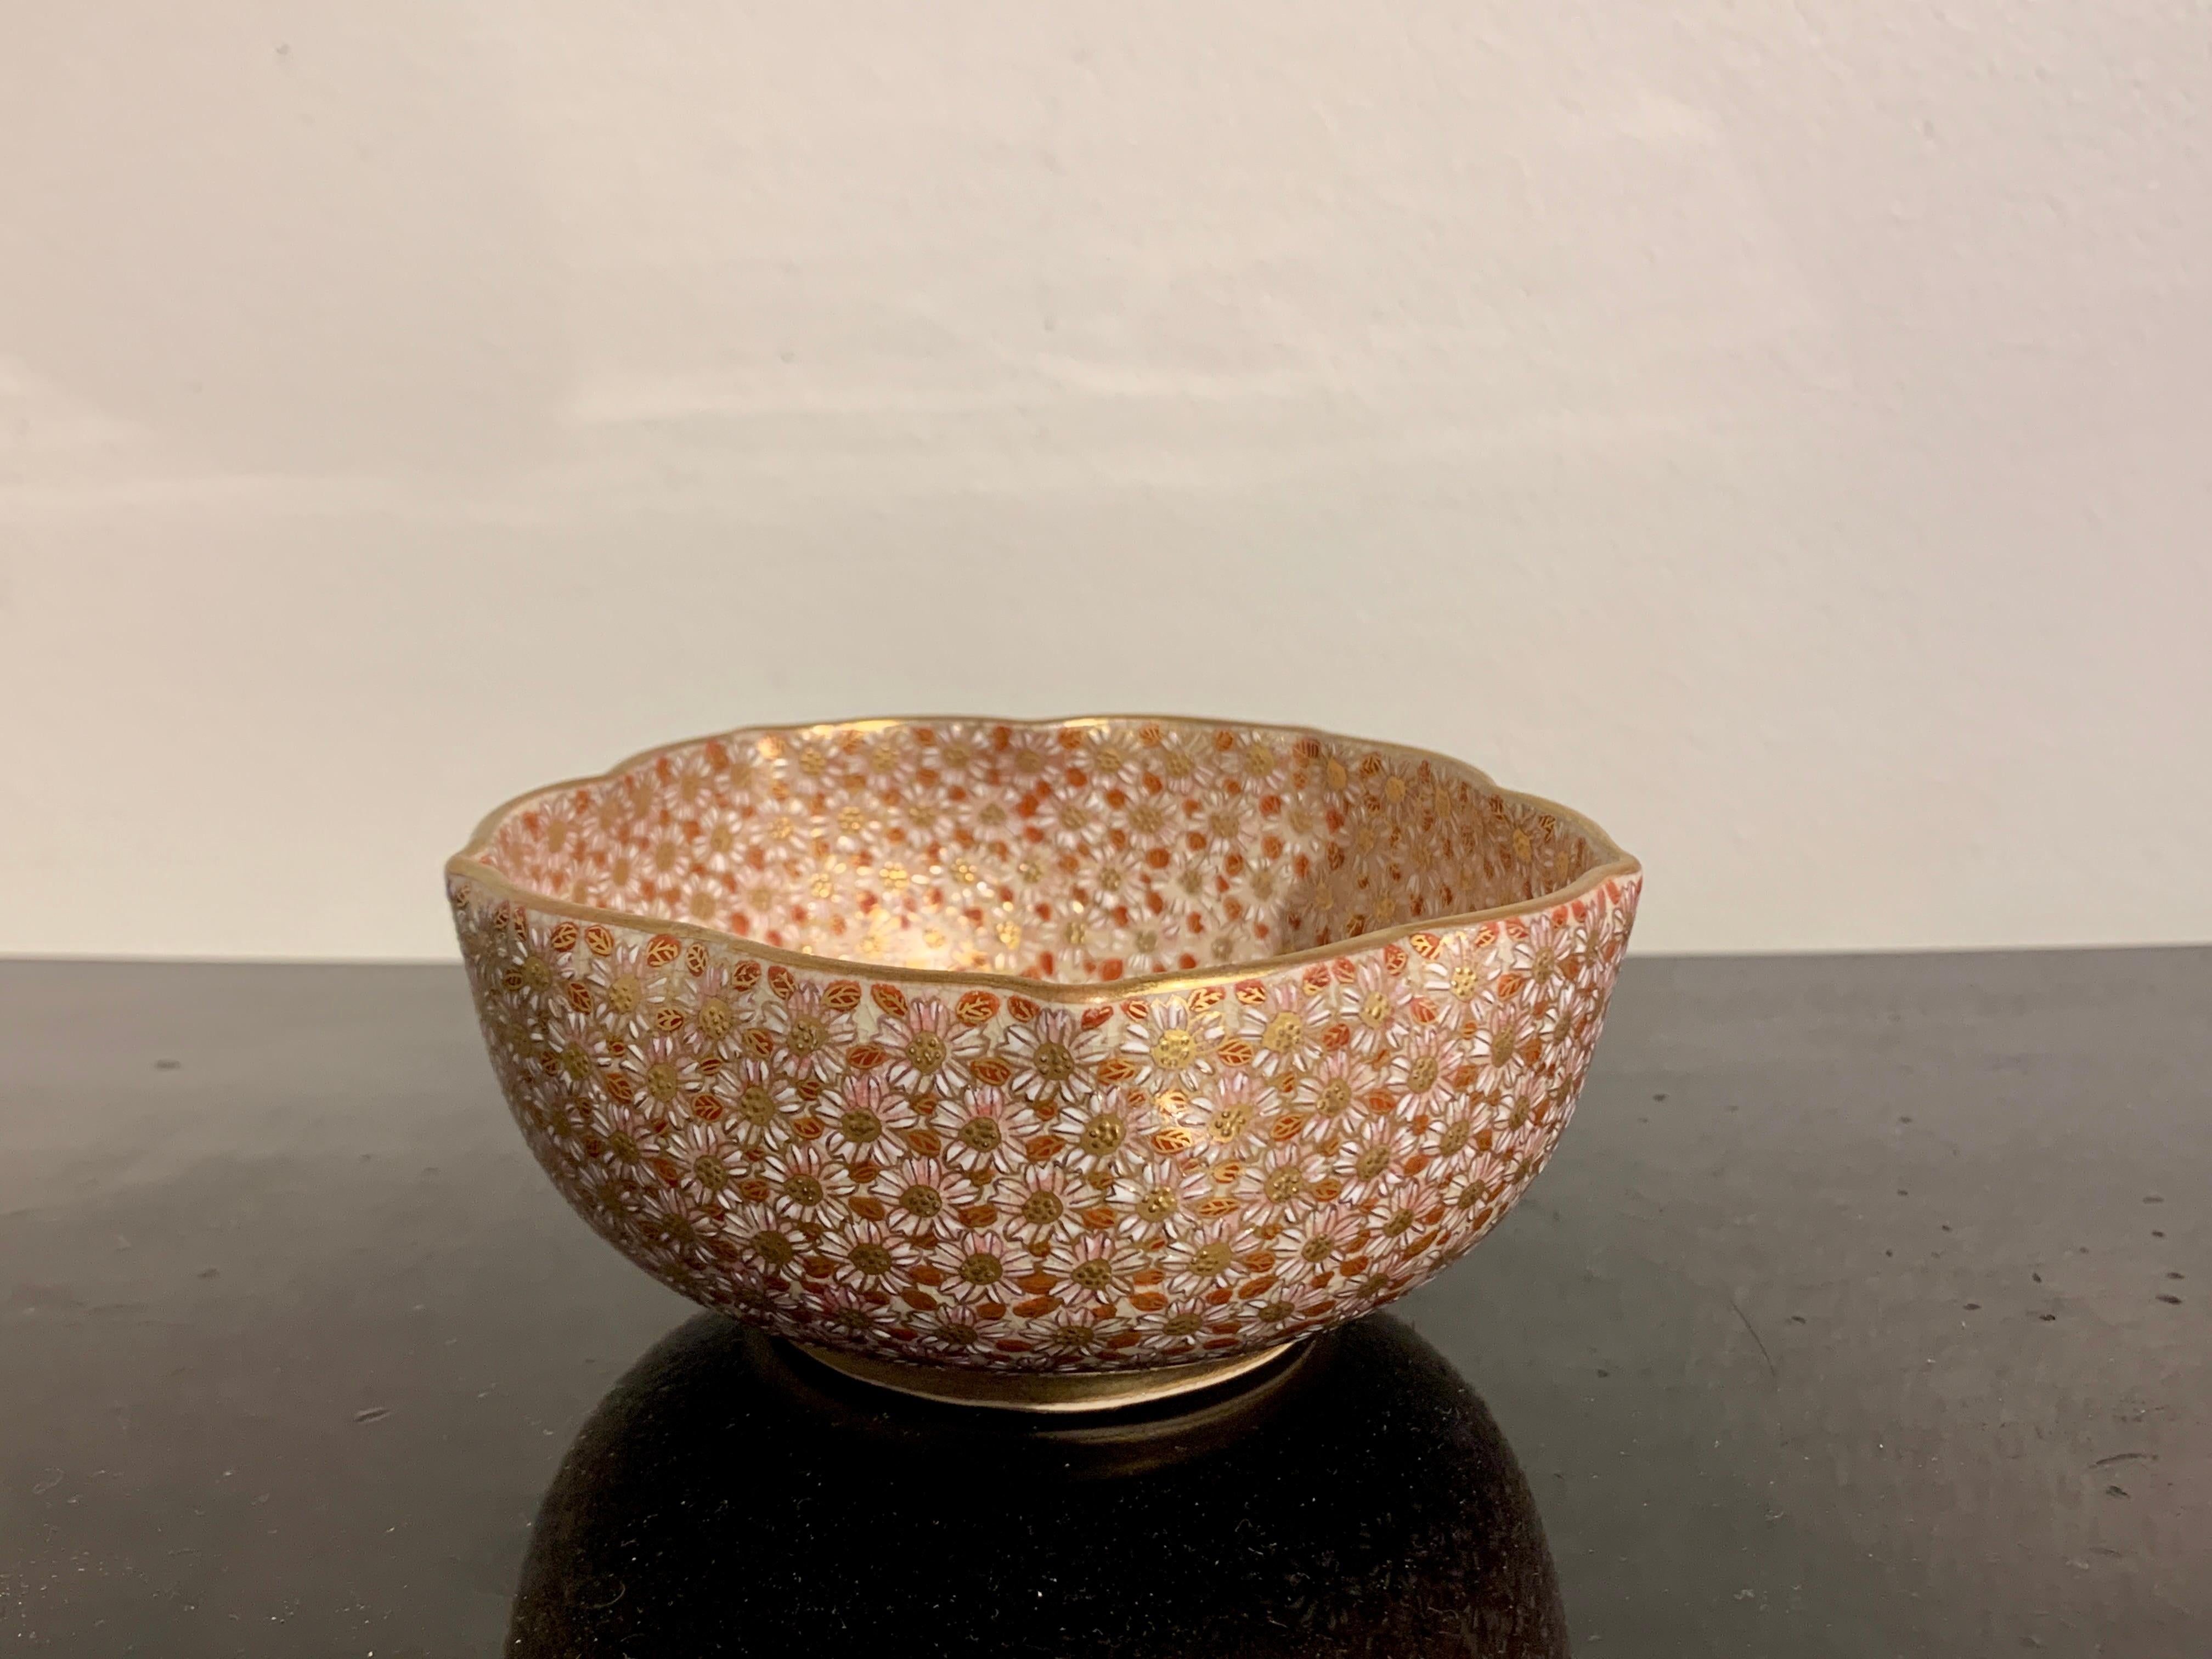 A meticulously decorated Japanese Satsuma chrysanthemum bowl, Showa Period, mid 20th century, Japan.

The bowl shaped as mallow (hibiscus) blossom. An intricate design of white chrysanthemum blossoms in raised enamels, with contrasting red and